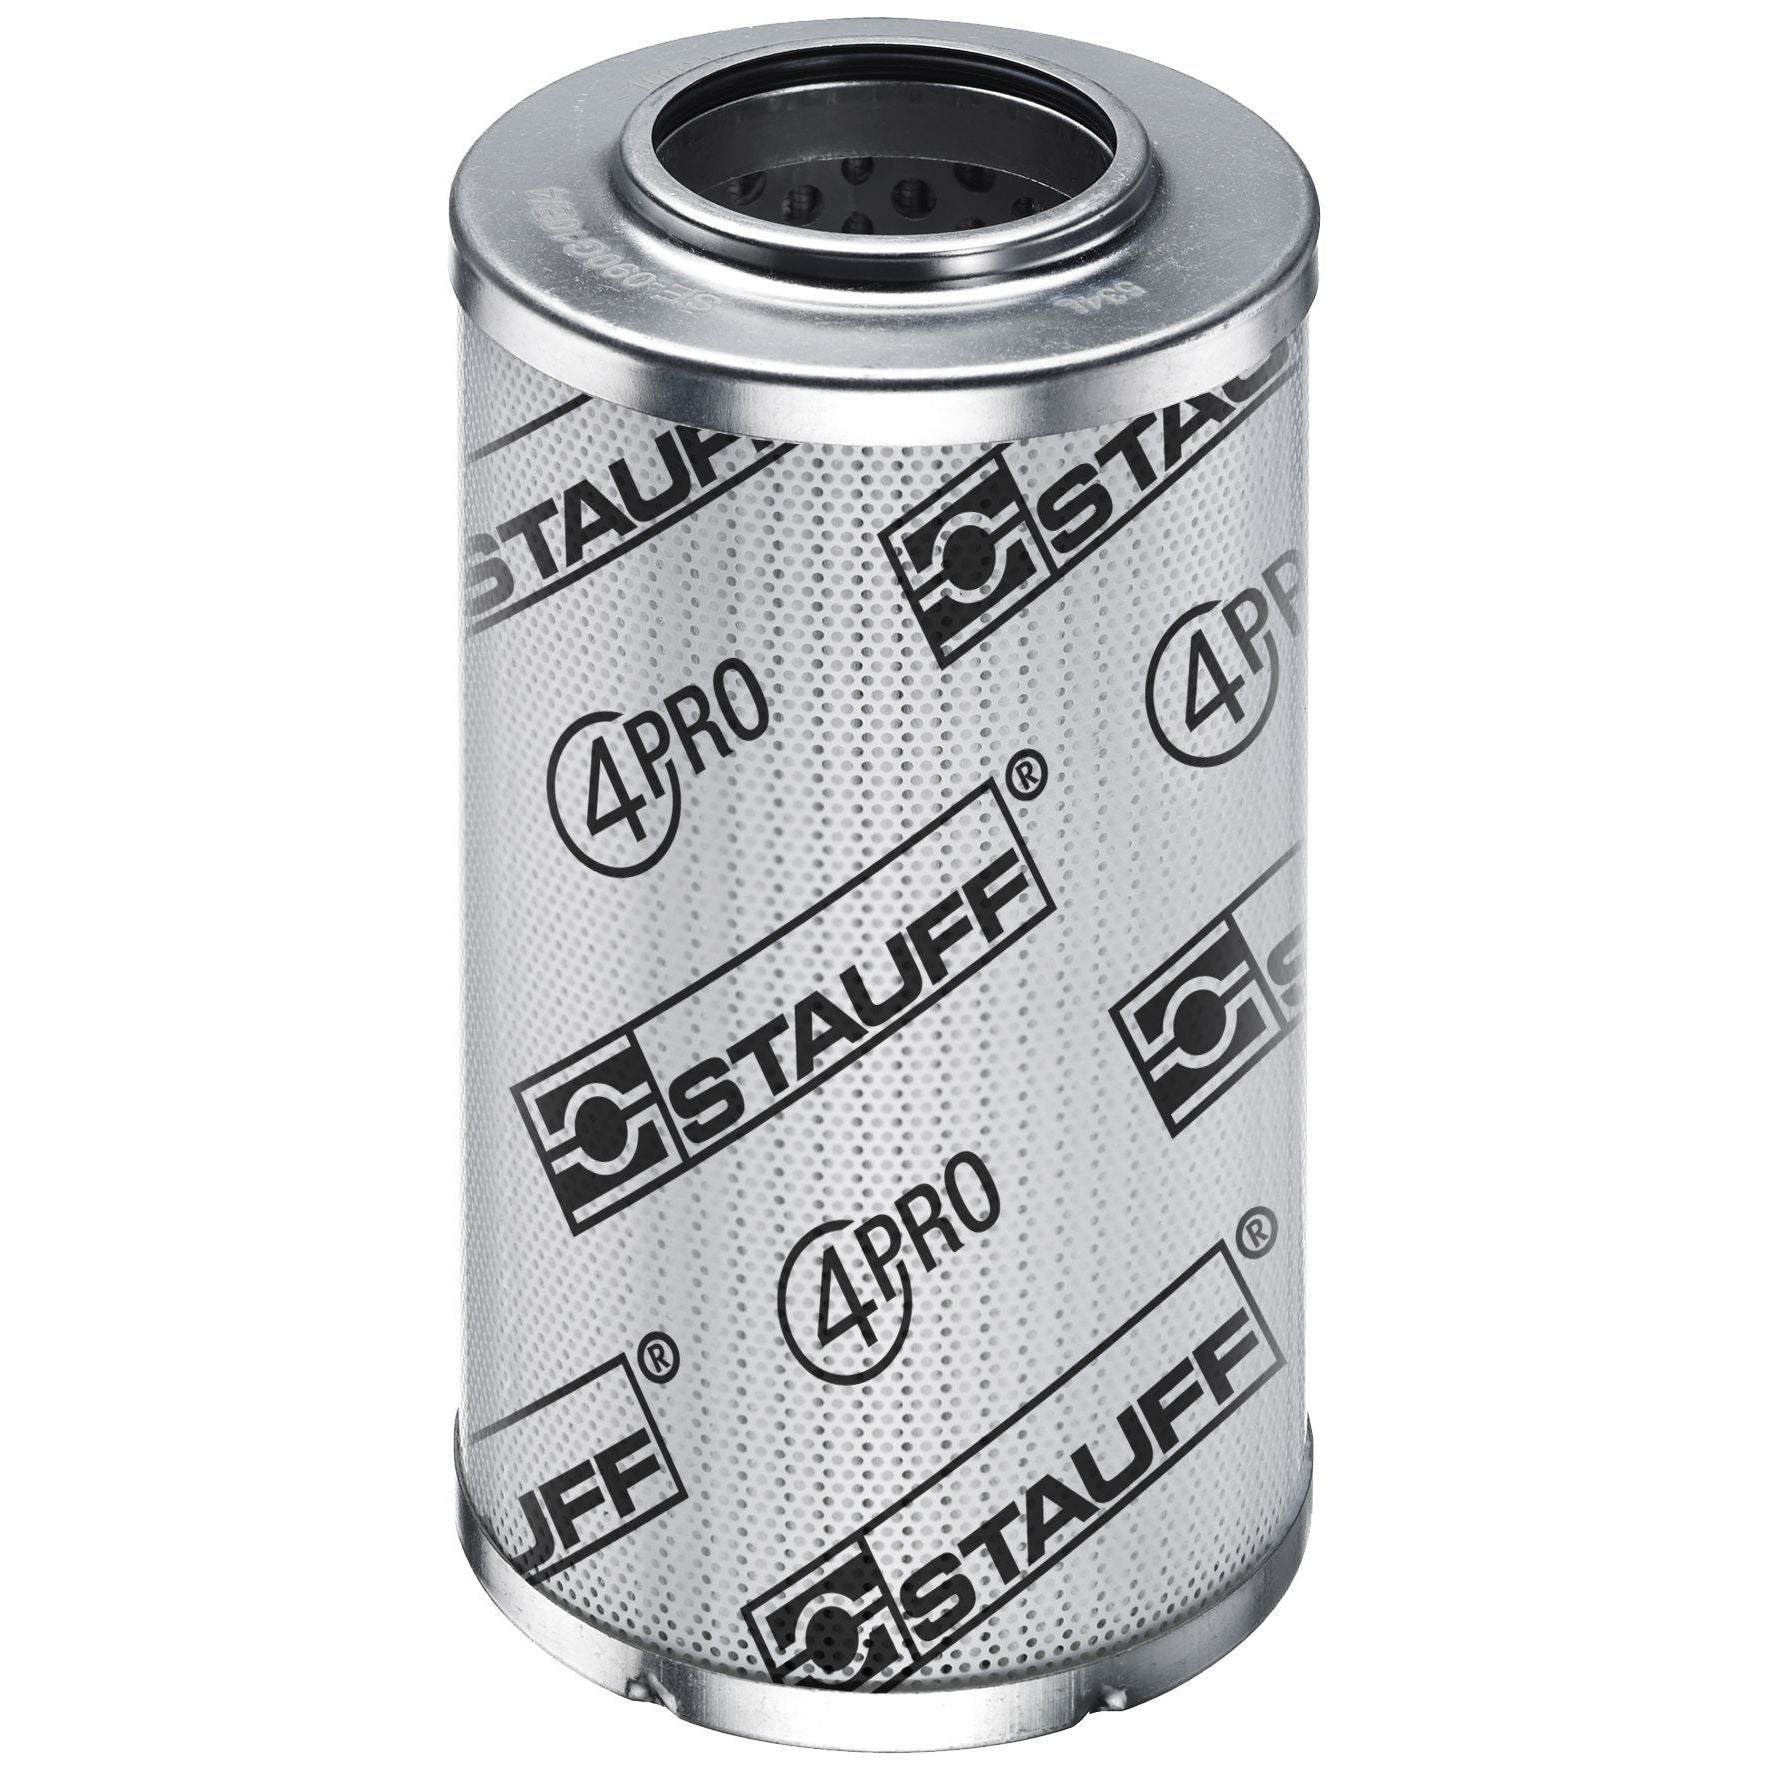 SE-300-G-20-B/4-1 : Stauff SF-300 Series Filter Element, 20 Micron, Synthetic, 363psi Collapse Differential, Buna